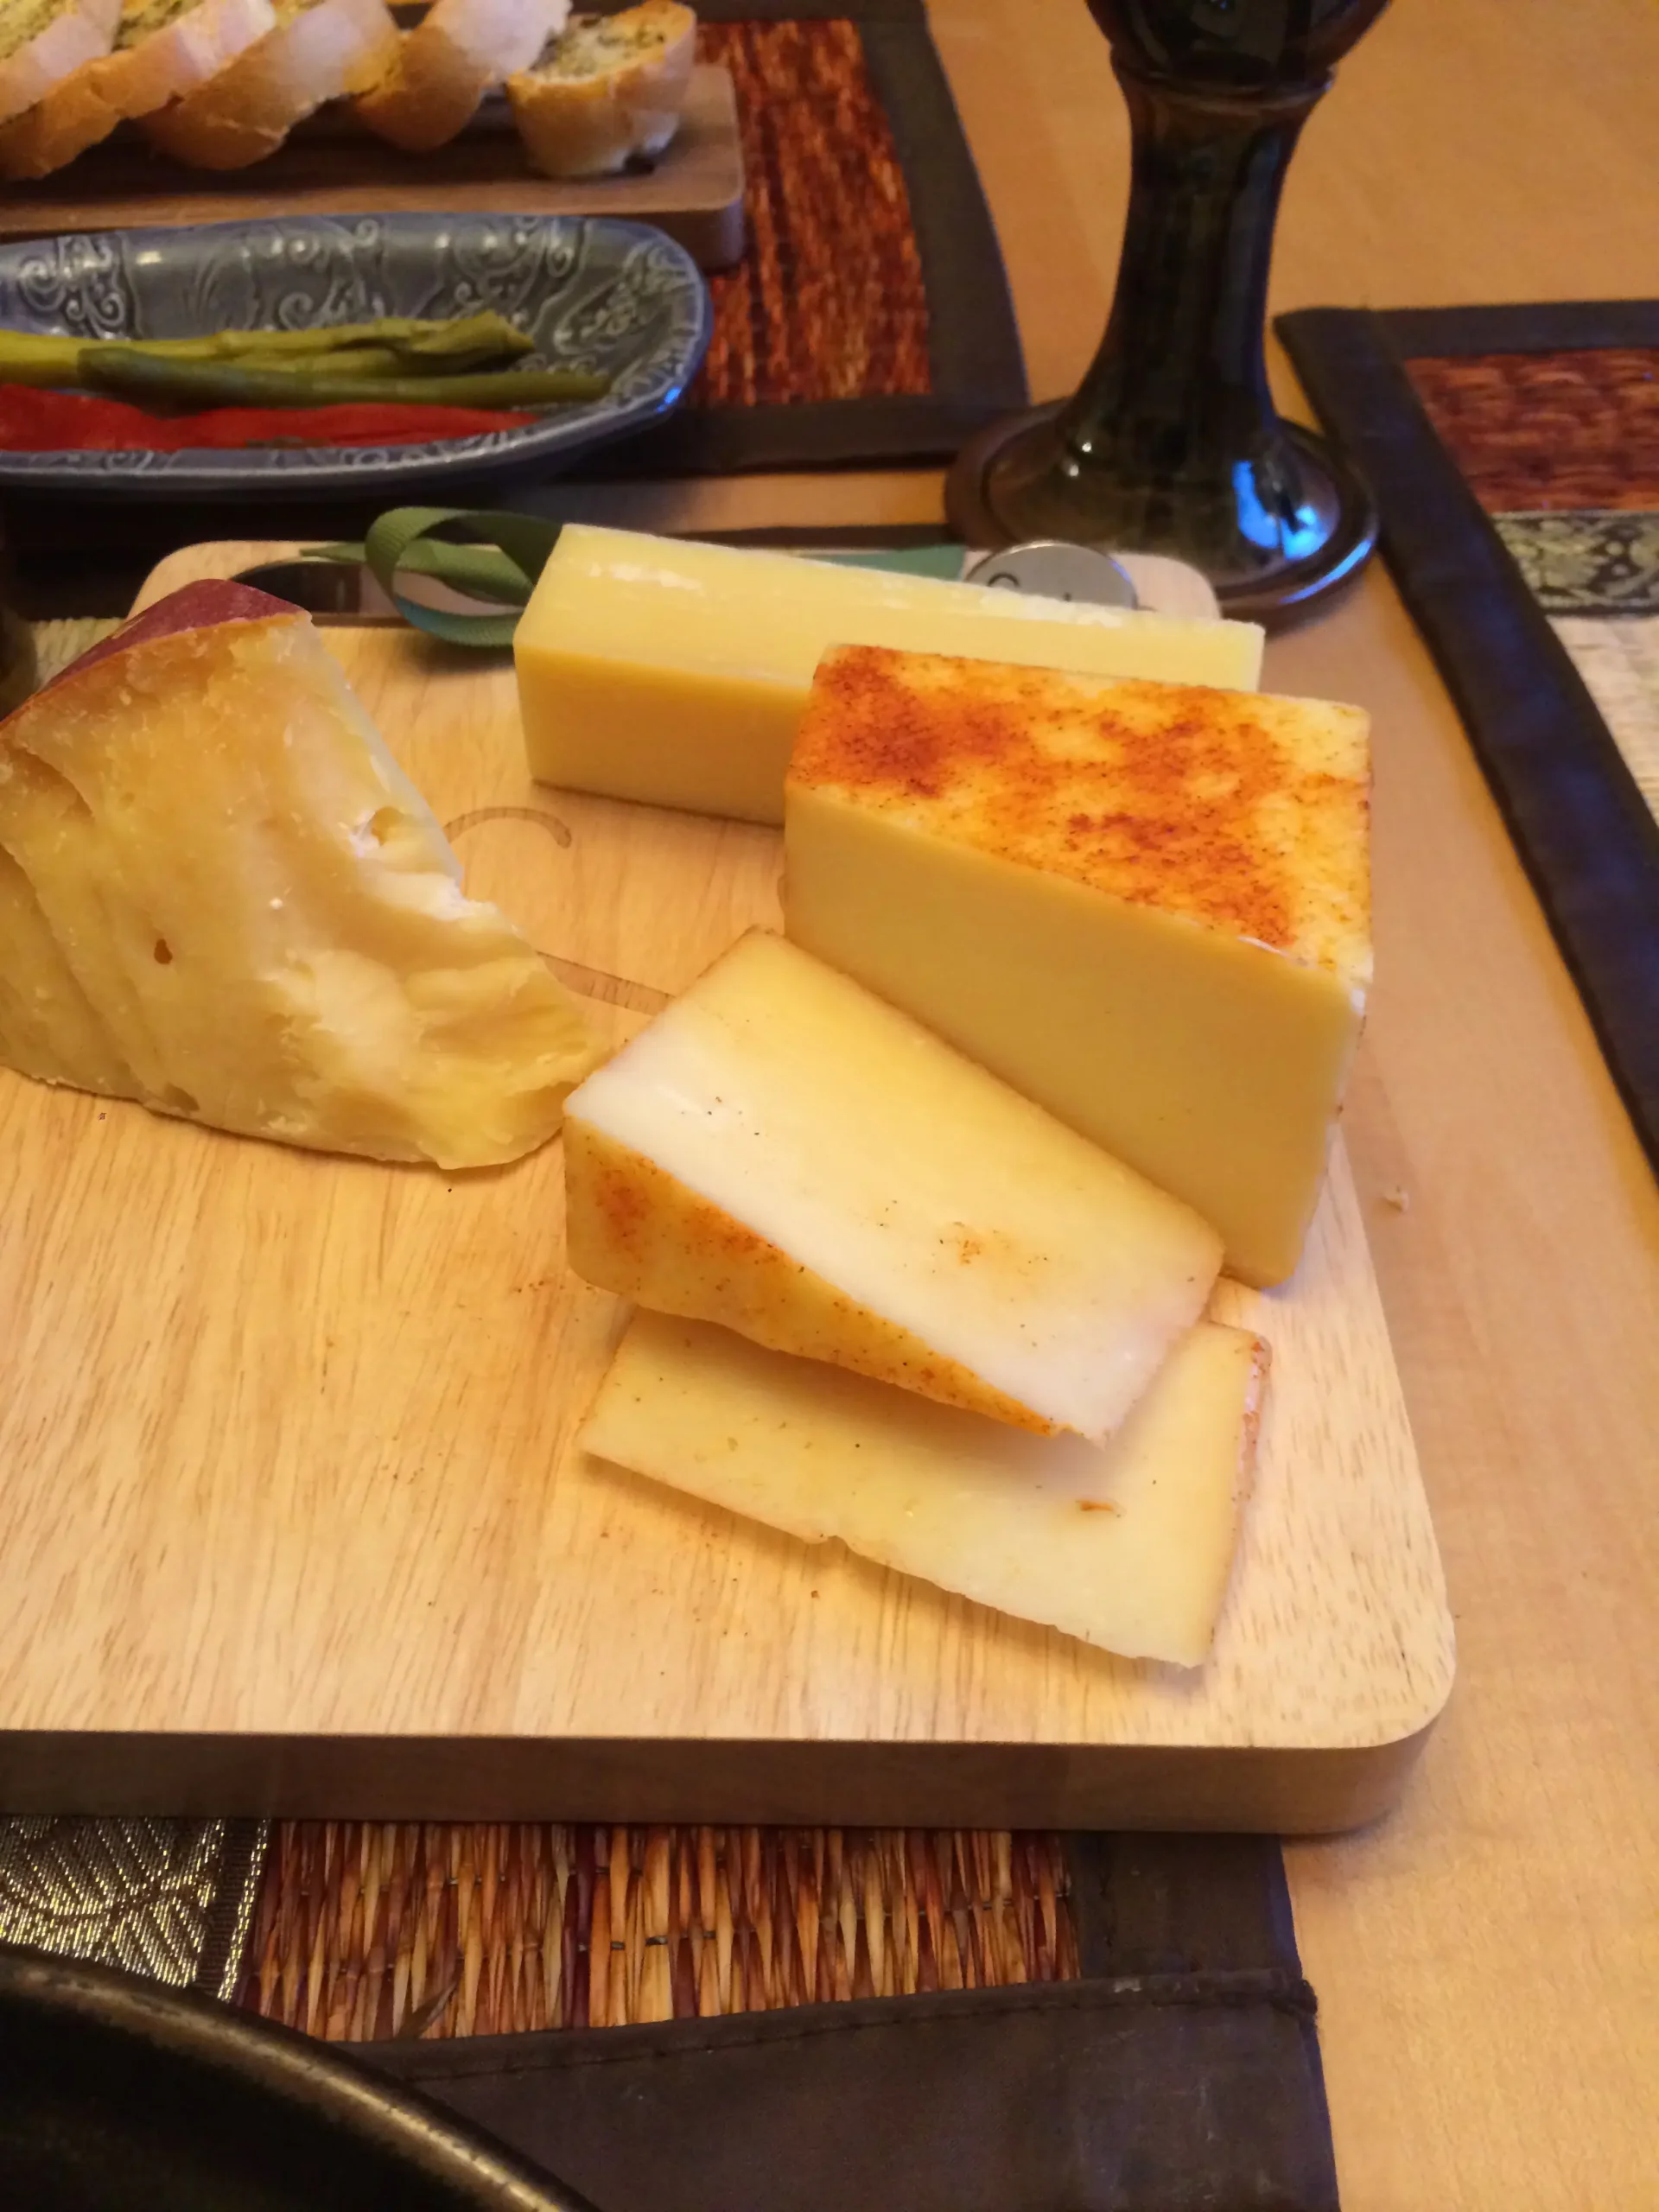 applewood smoked cheese - What is Applewood smoked flavor